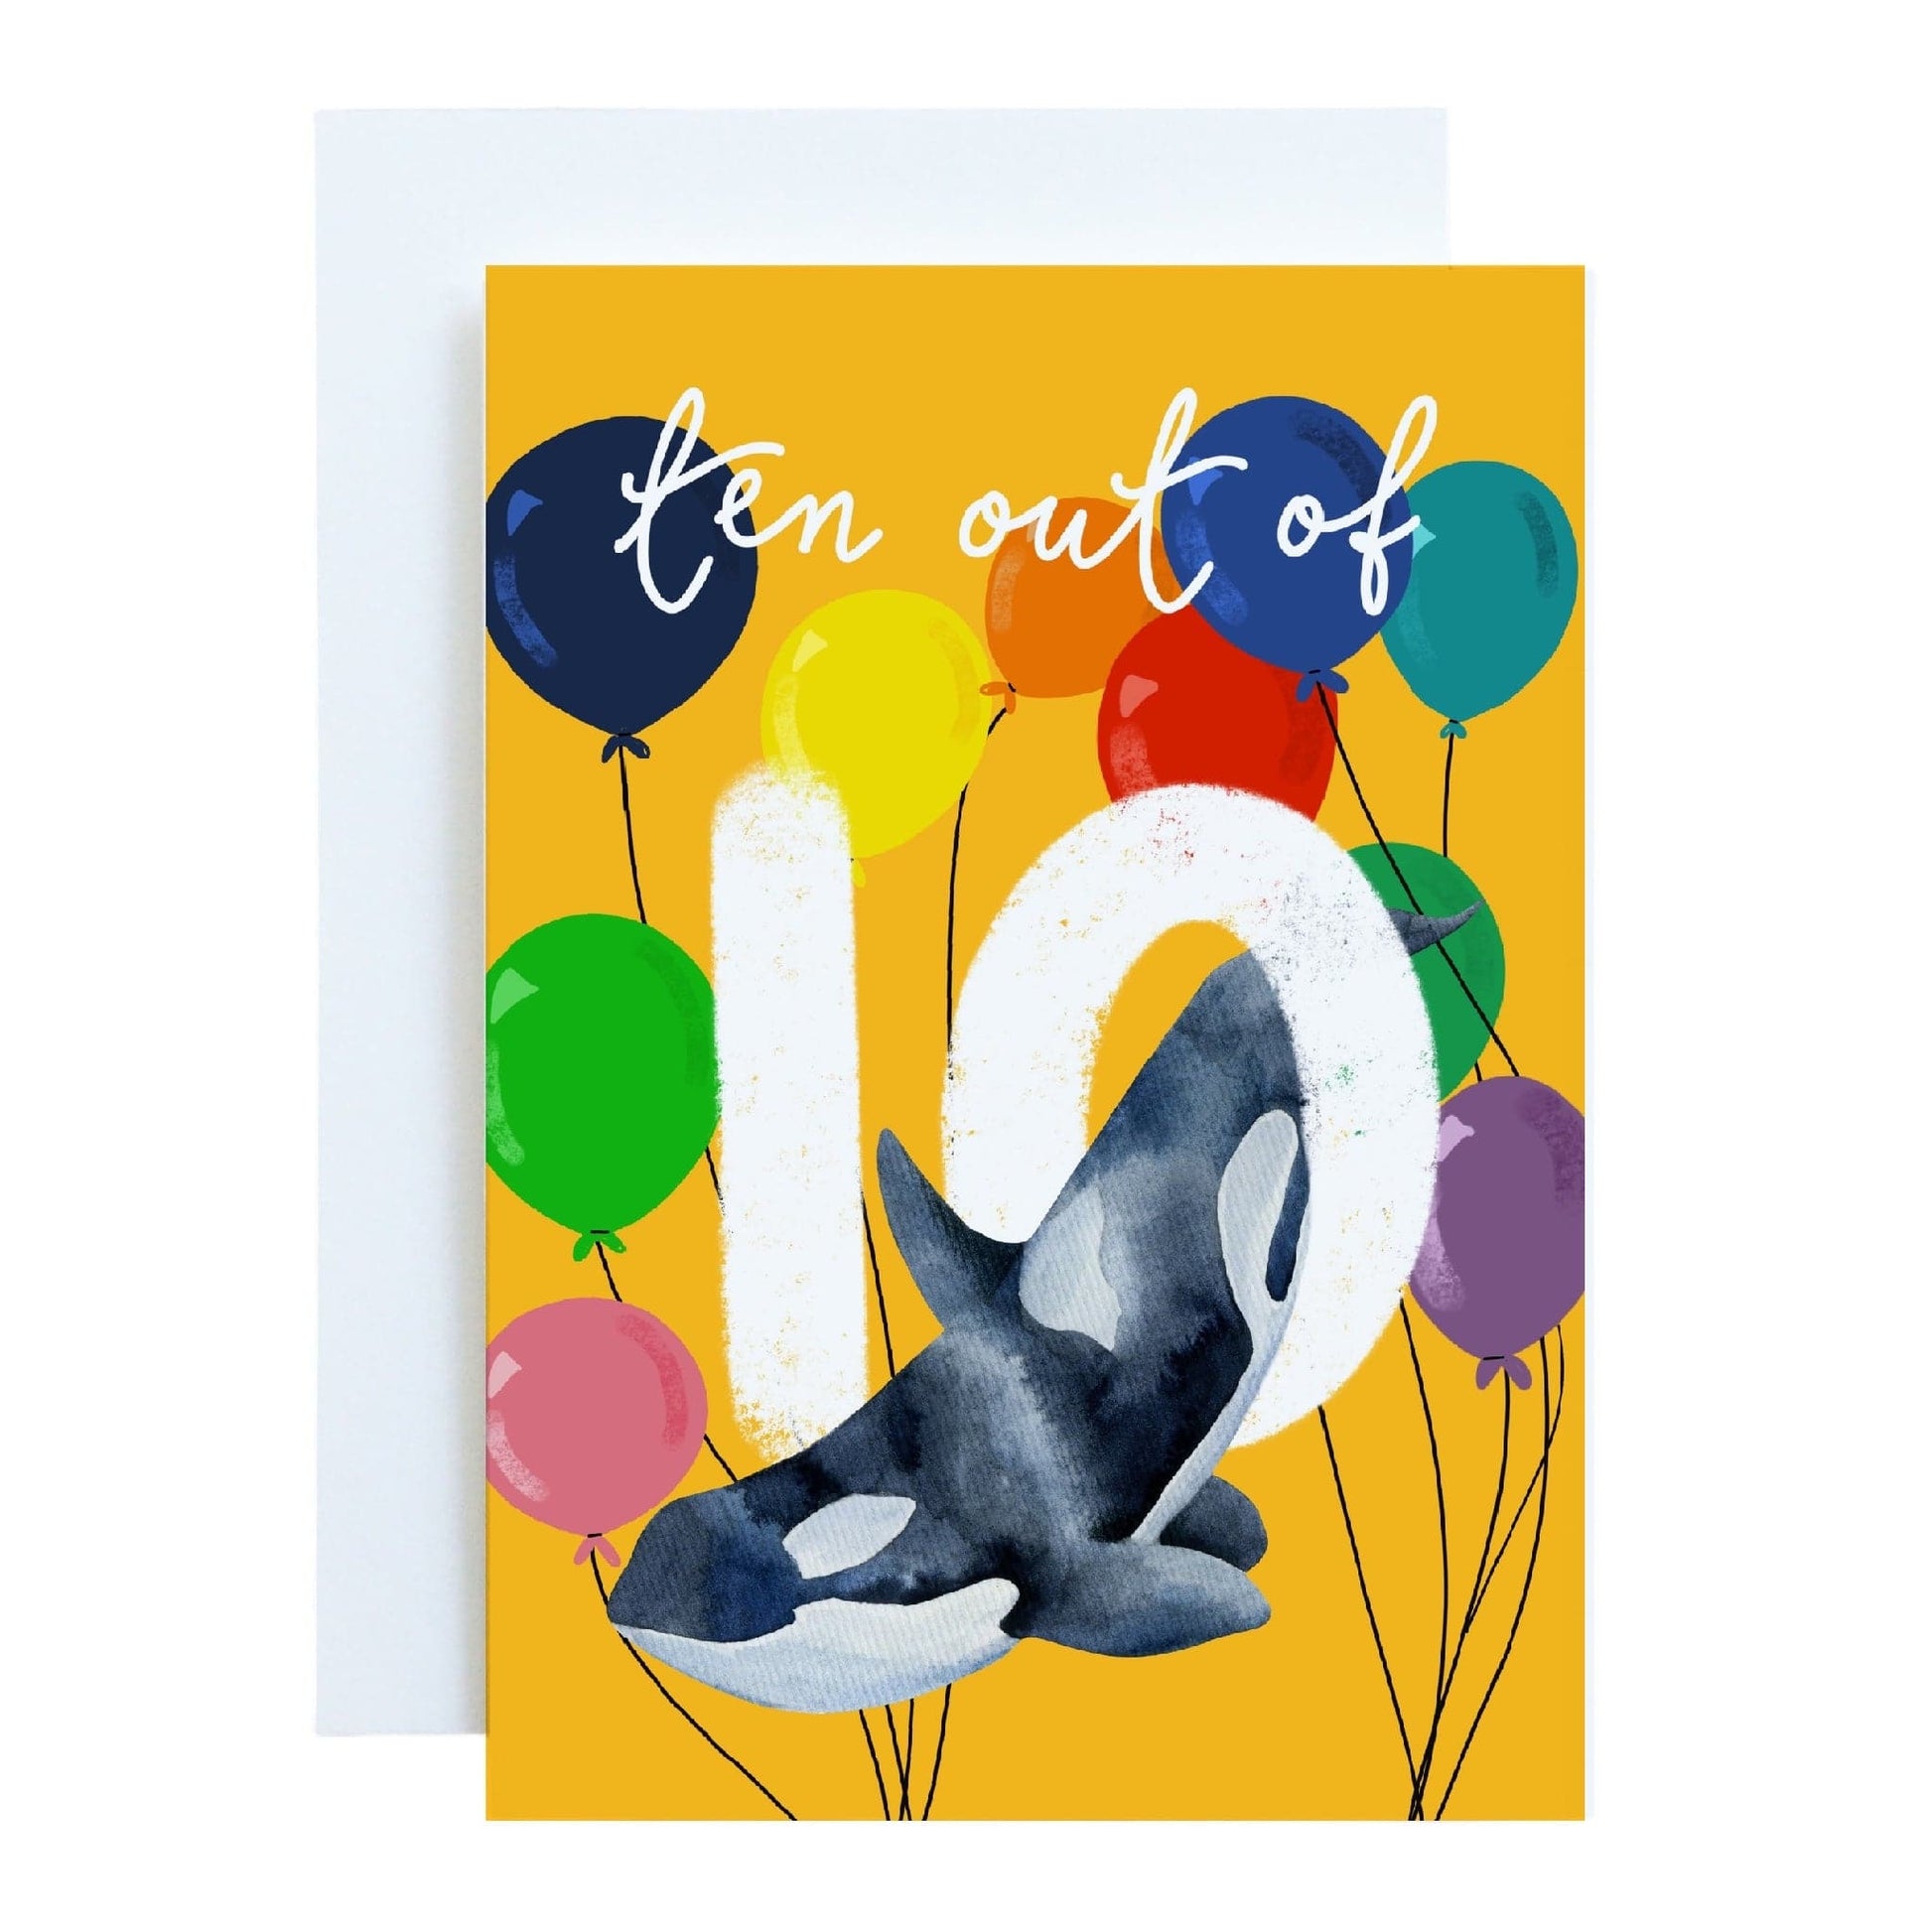 Orca Whale Tenth birthday Card - Bright “Ten out of 10” Cards And Hope Designs   